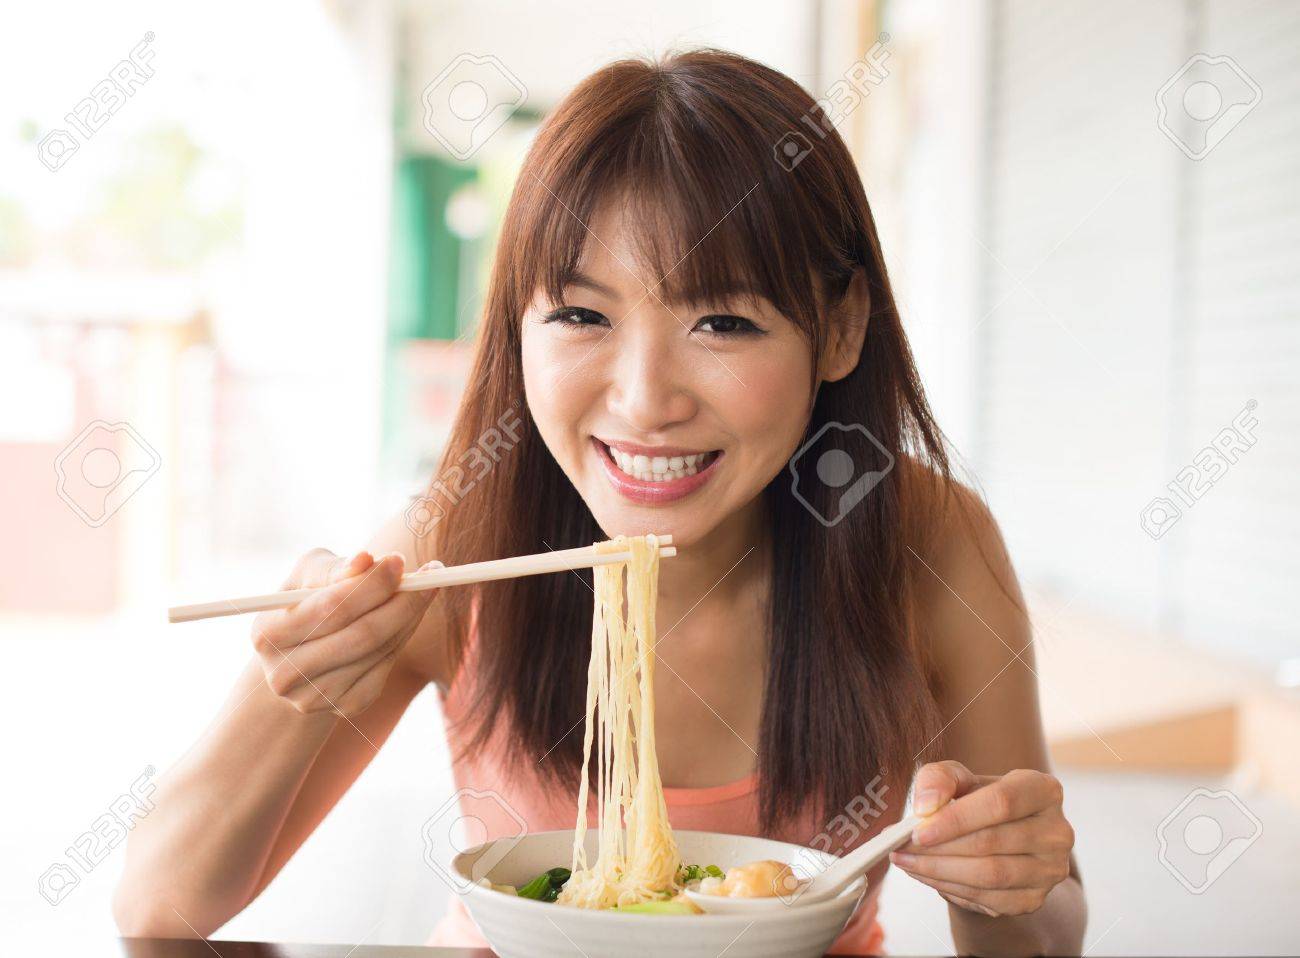 brin smith recommends japanese girl eating noodles pic